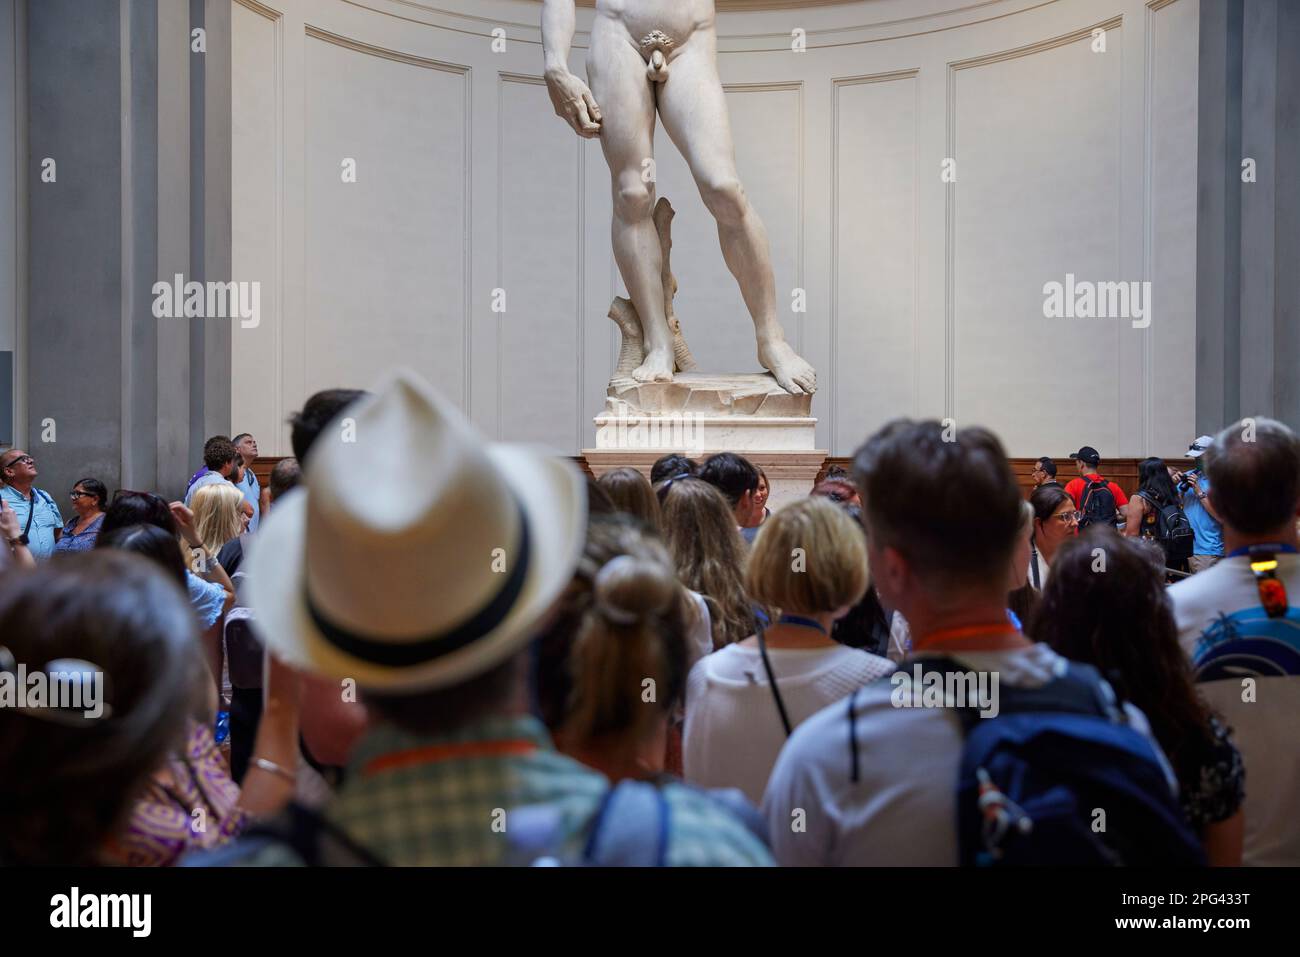 People looking at the statue of David, Galleria dell'Accademia, Florence, Italy Stock Photo